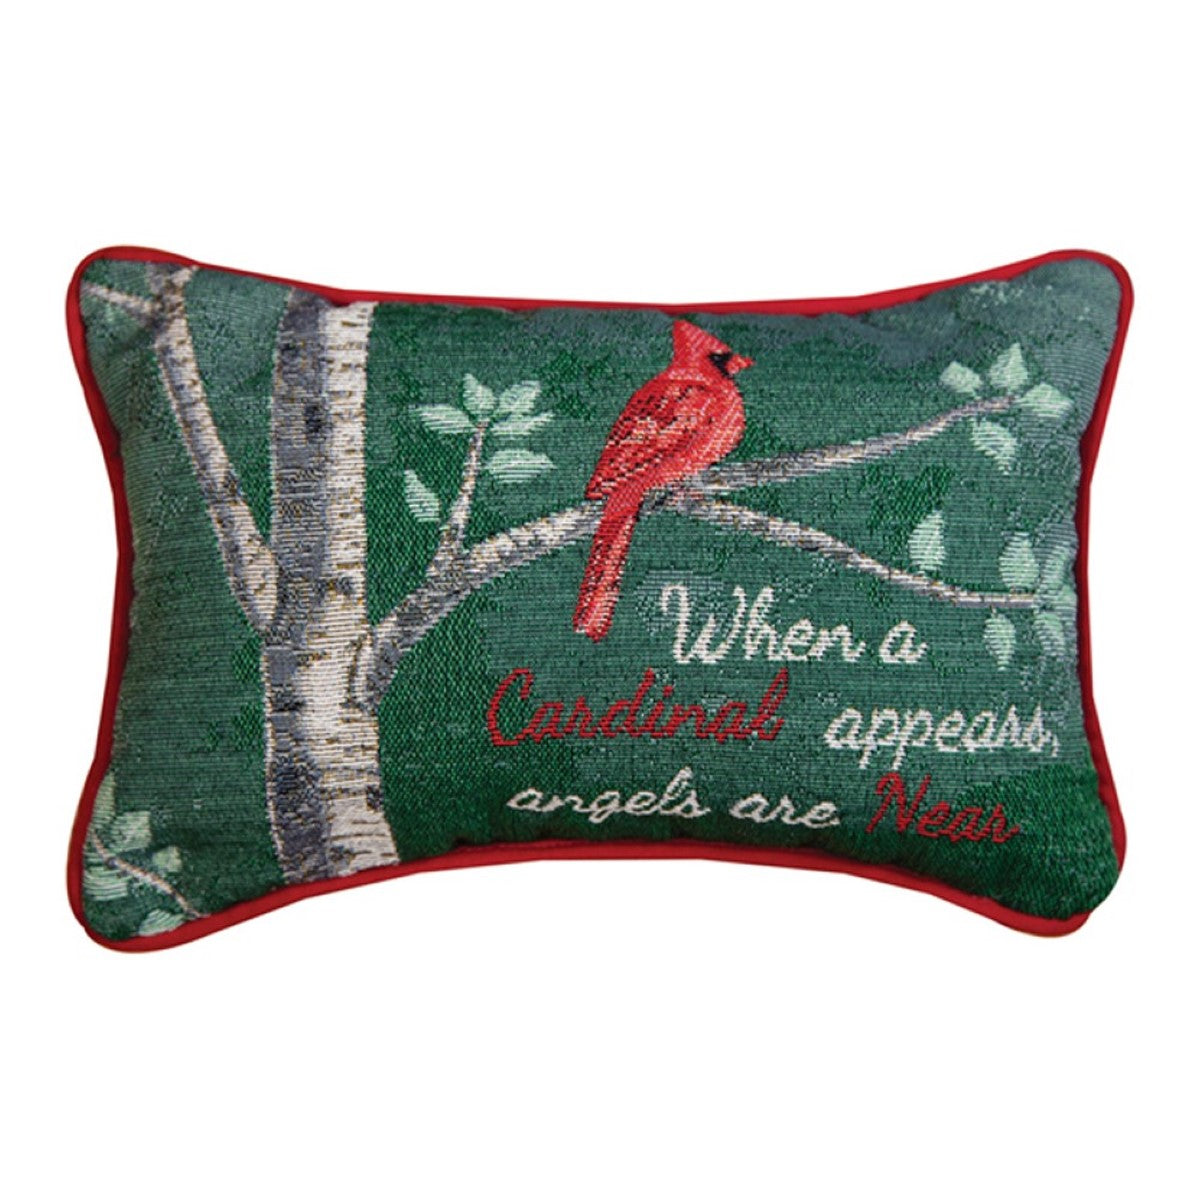 When A Cardinal Appears Word Pillow